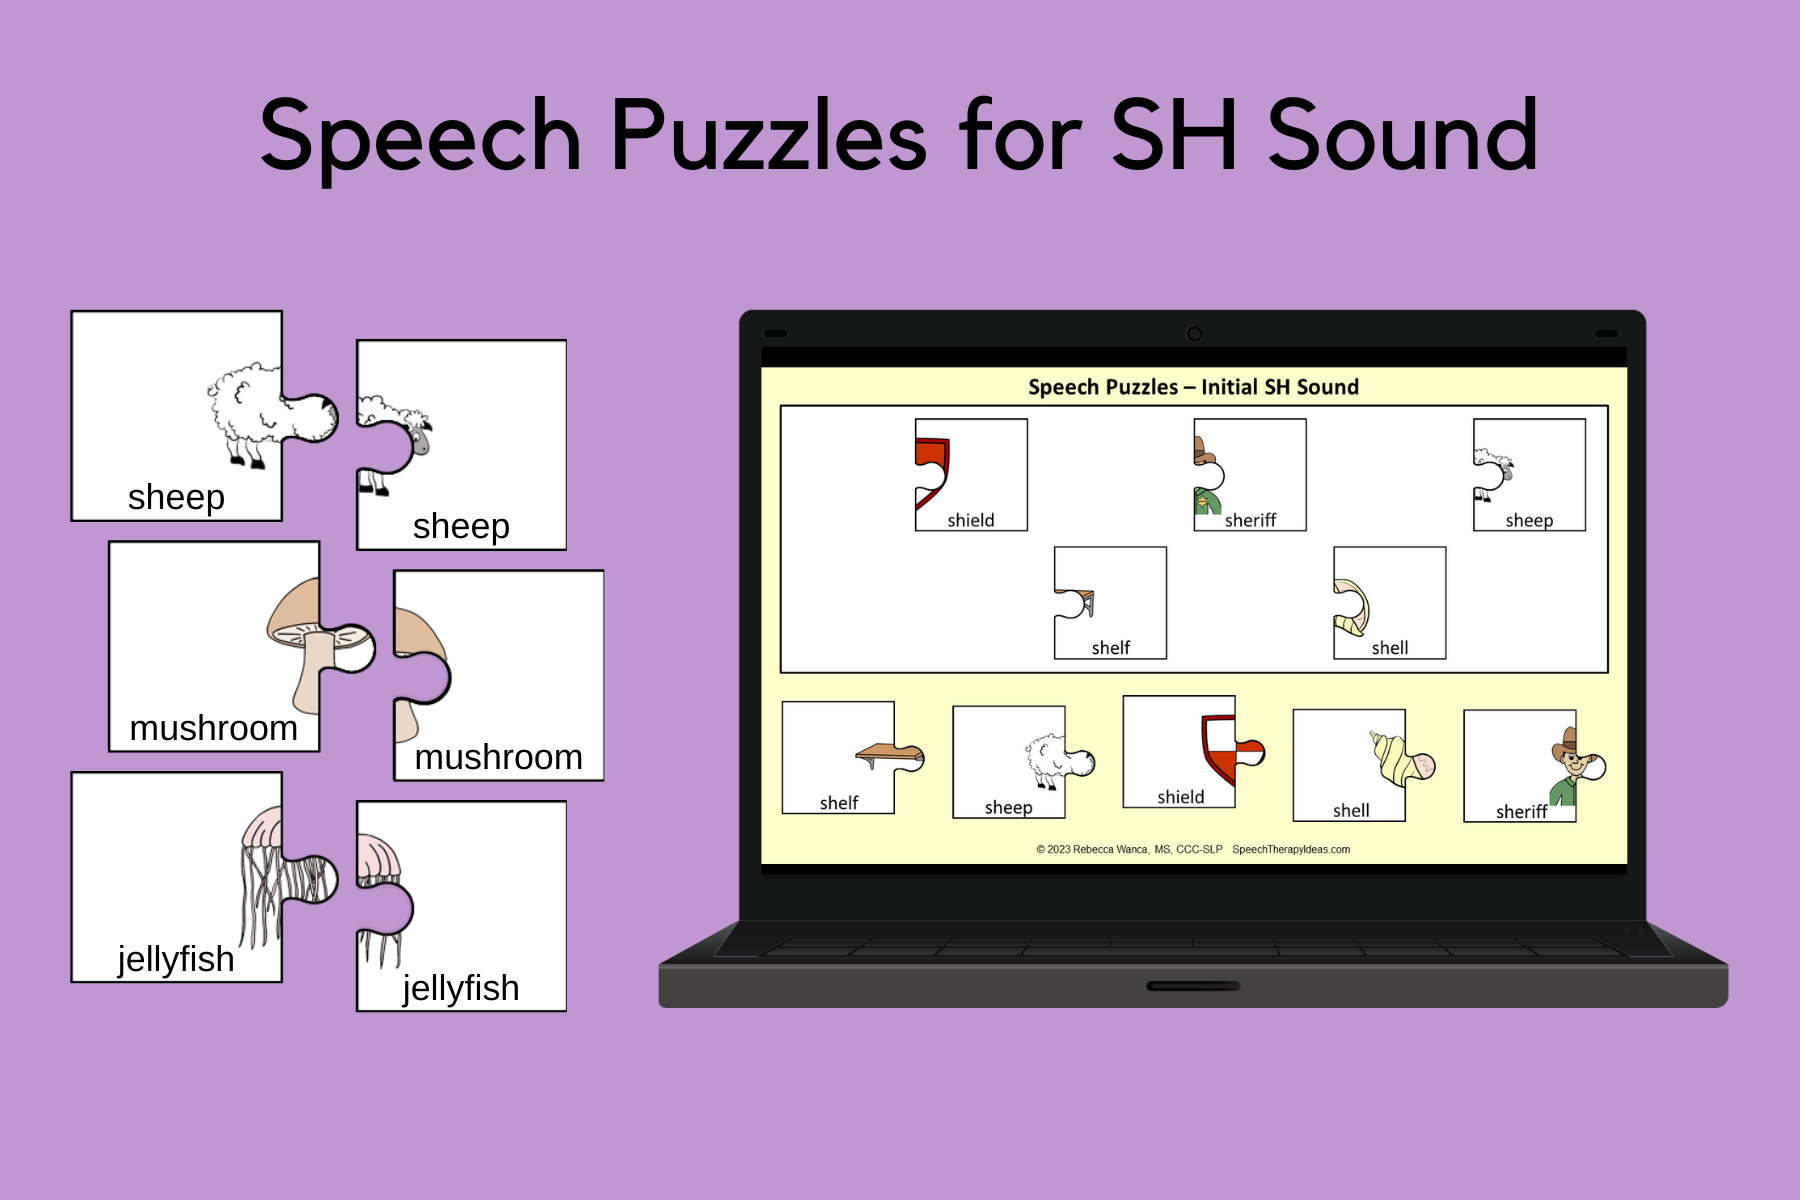 Speech Puzzles for SH Sound